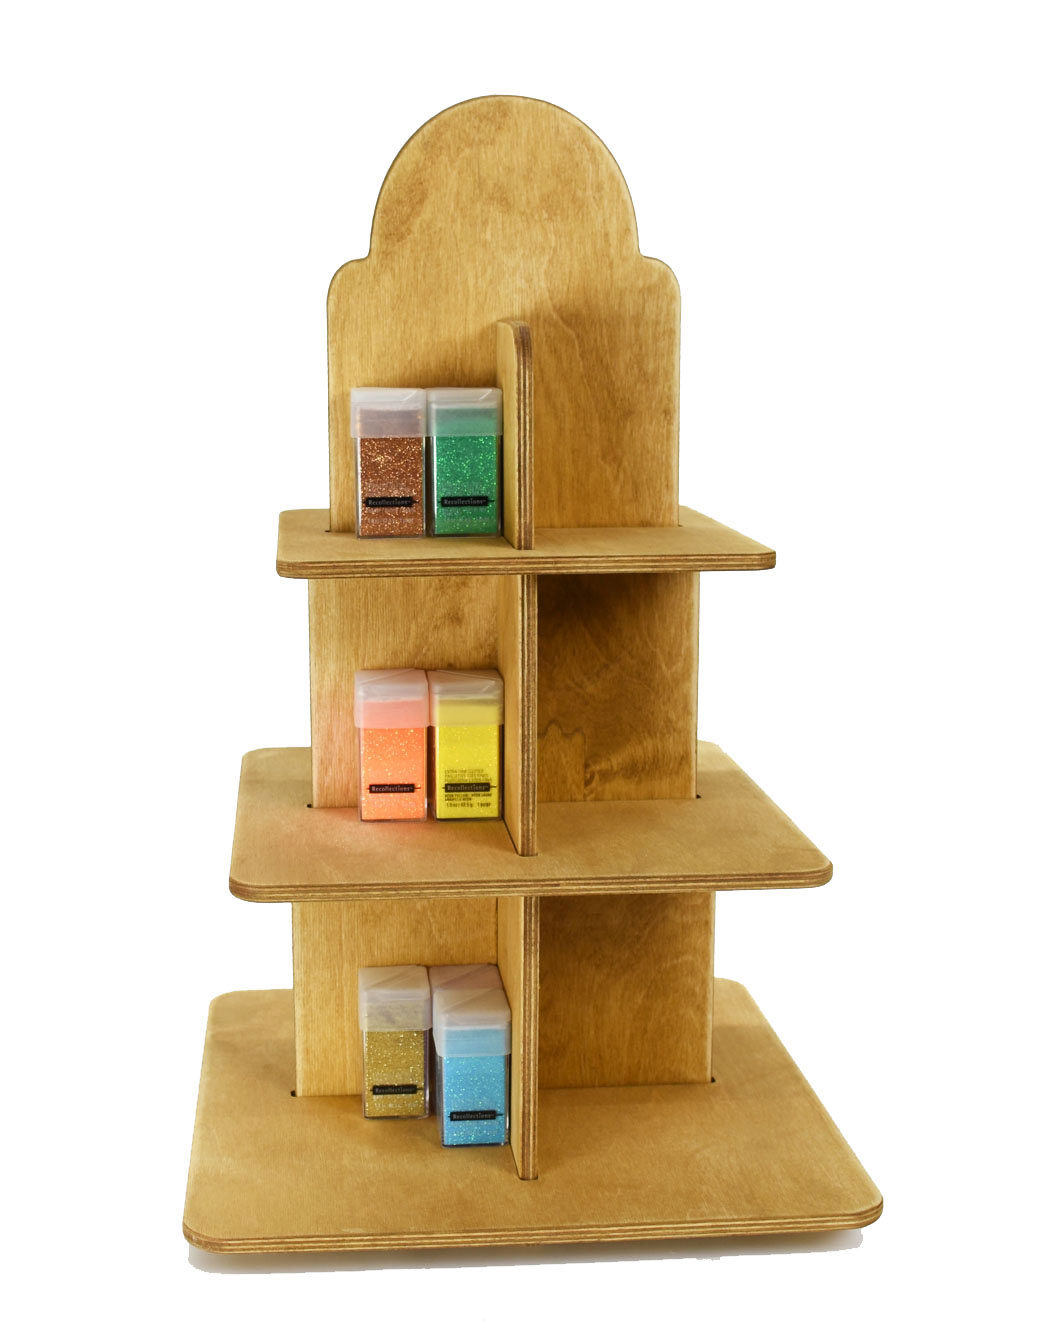 Counter Rack 3 tiers, Perfect for Displaying a Variety of Small Items - SKU: 420